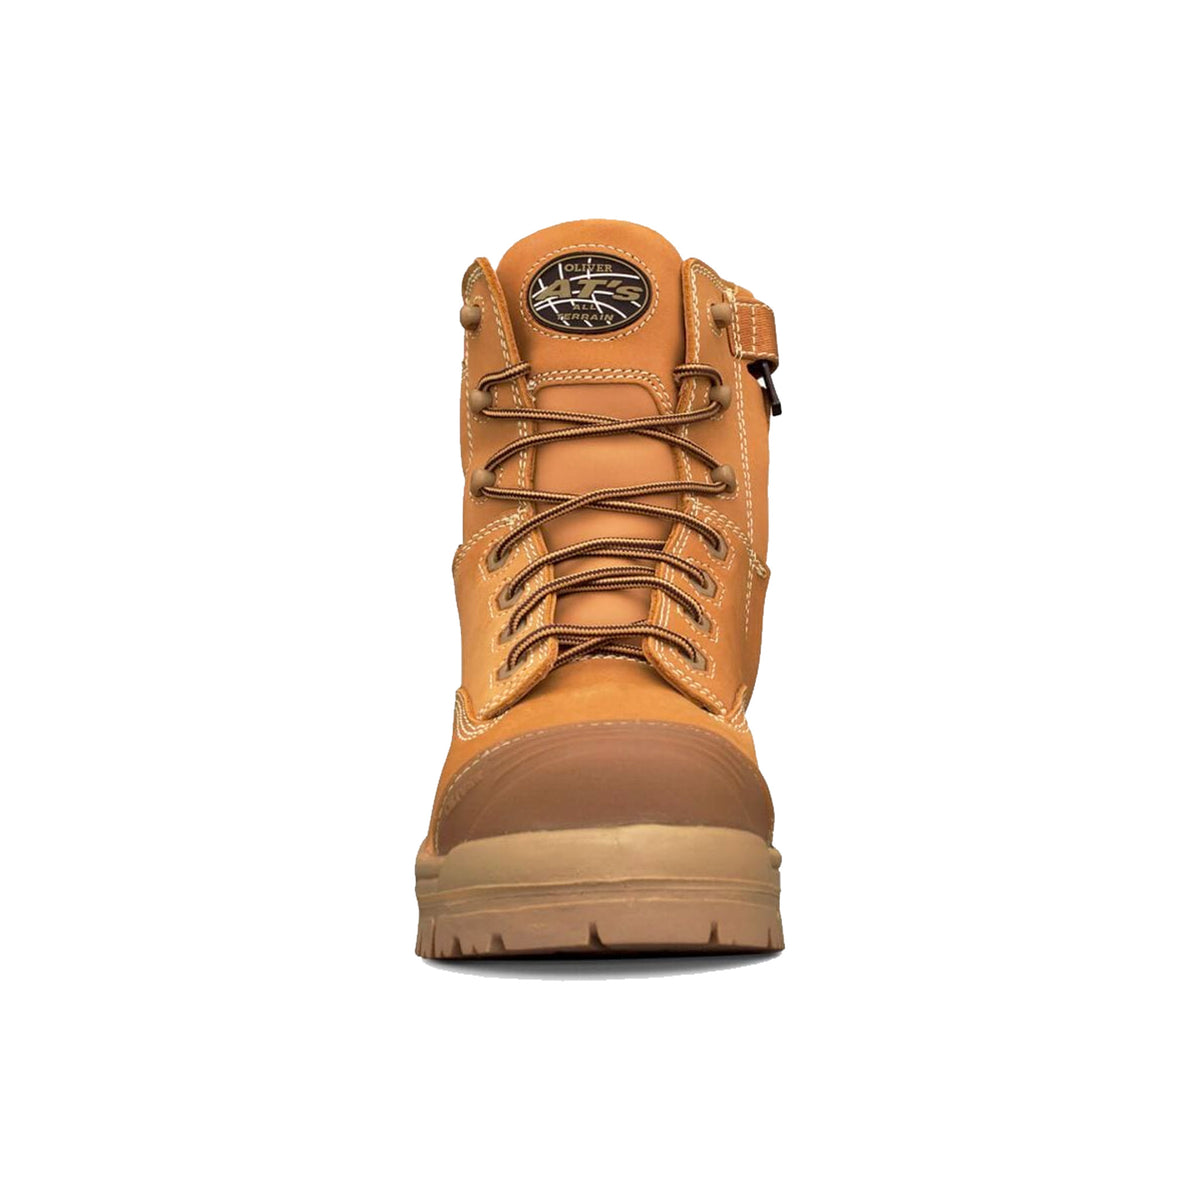 OLIVER WOMENS WHEAT ZIP SIDED BOOT - 49-432Z | TRADIES WORKWEAR STORE